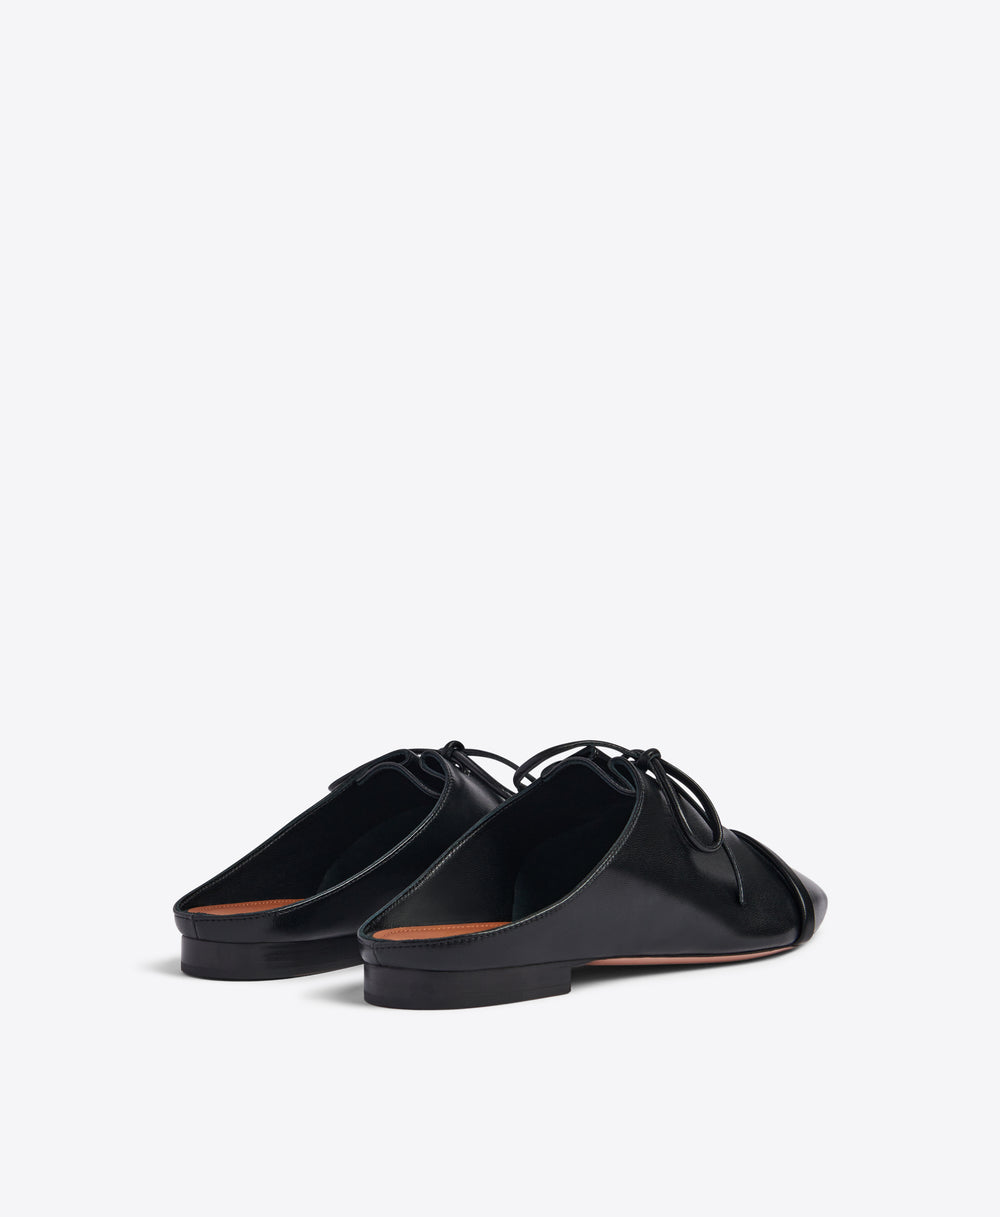 Malone Souliers Jacqueline Black Leather Flat Mules